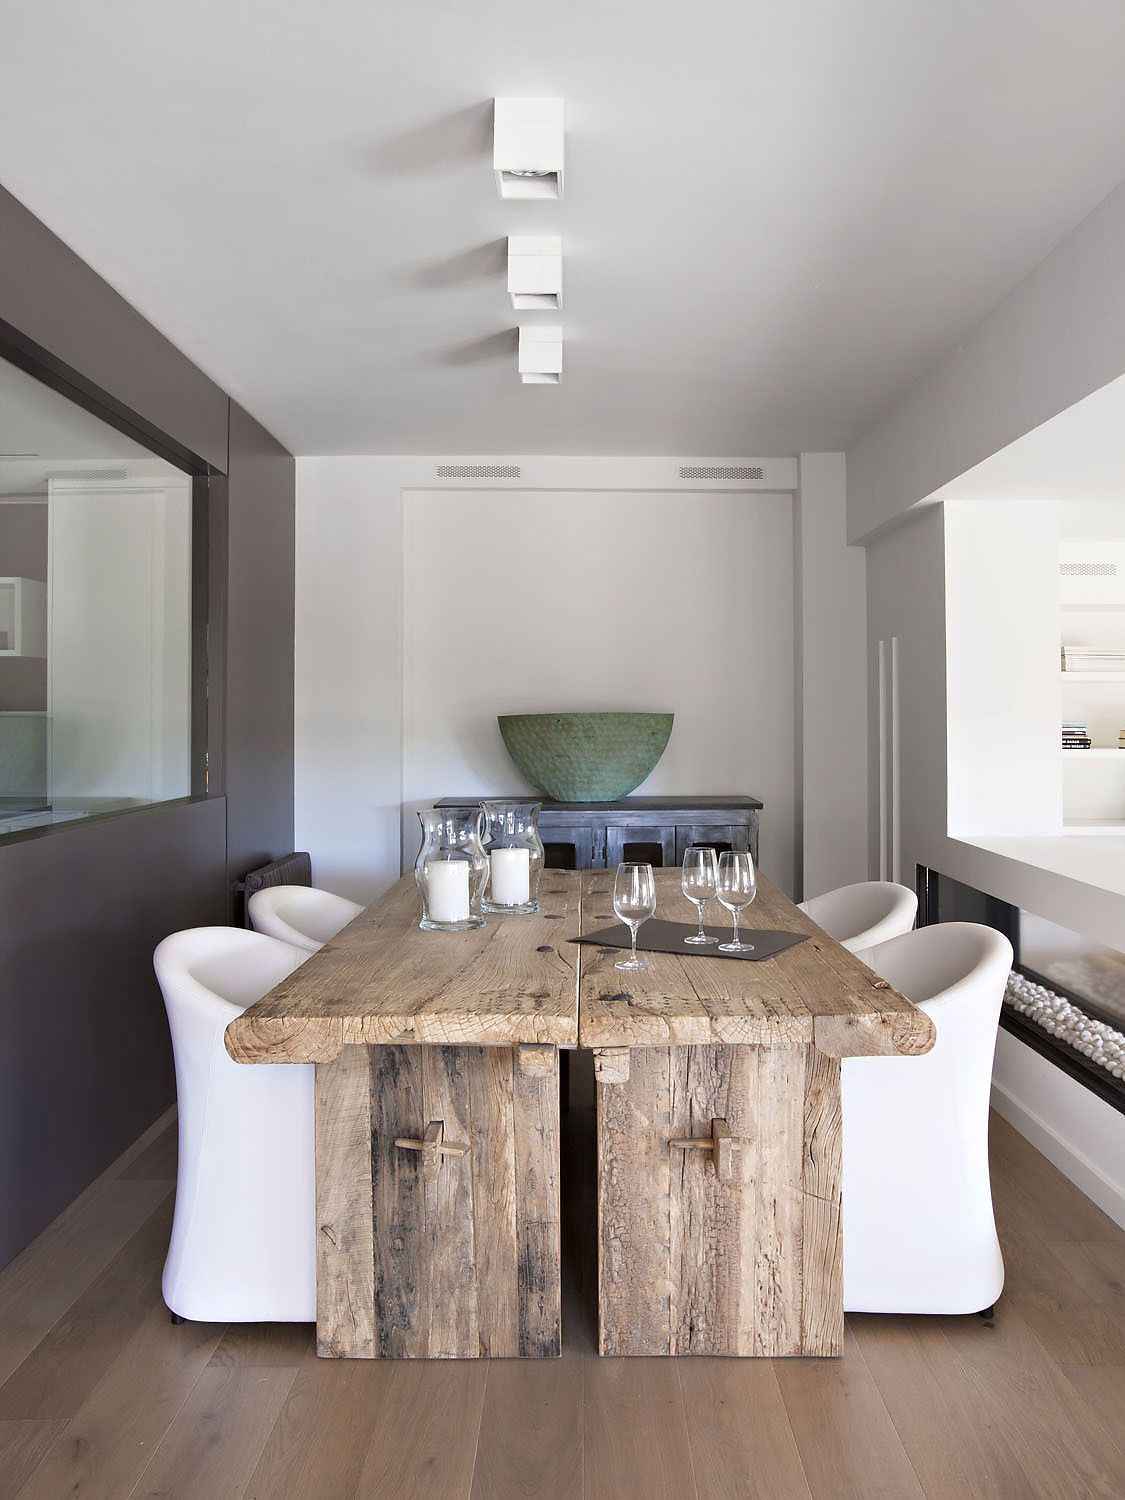 What caught my eye was the juxtaposition between the ultra modern and extremely rustic… I love a beautiful table, and I don’t